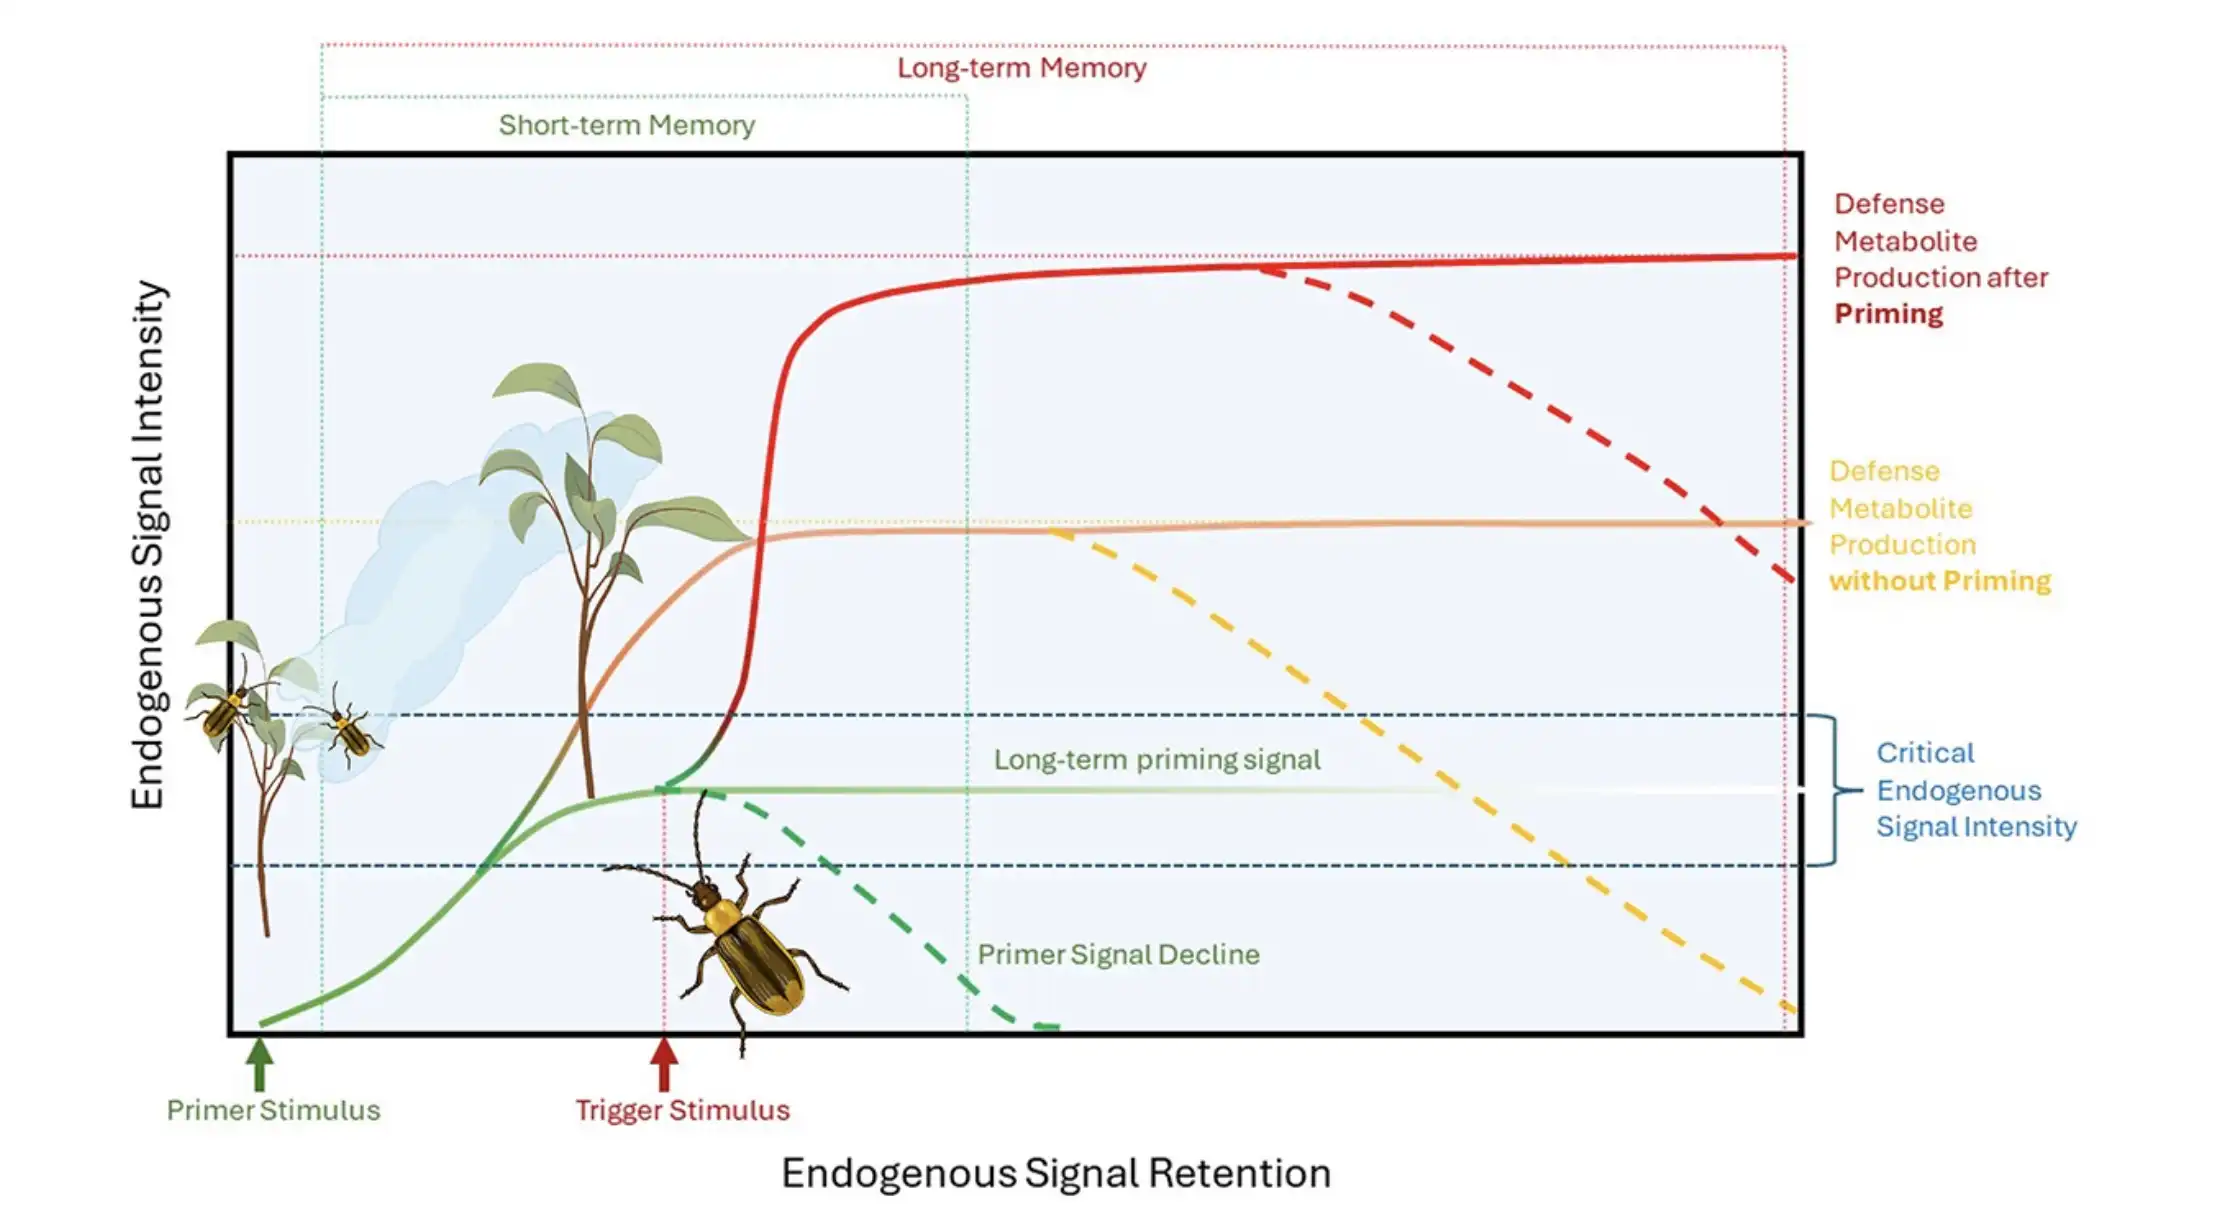 Image: Plant defense priming in response to herbivory. Primer stimuli are environmental cues (e.g. volatile organic compounds from damaged neighboring plants, direct herbivore damage, spectral and chemical information) that elicit plant endogenous signaling and so ready plants for faster and stronger responses when additional attacks by herbivores occur (trigger stimulus). Intensity of the priming stimulus and the plant’s inherit sensitivity determine how strongly the plant is responding to a stimulus, reaching from alterations in endogenous signaling that may not significantly affect metabolism to a direct induction of defense metabolism. If the endogenous signal intensity elicit by environmental stimuli ranges within a critical signal intensity, a subsequent trigger stimulus (e.g. direct damage by a herbivore) will result in a faster and stronger expression of the plant defense metabolism. The reliability of a priming stimulus as a predictor of subsequent fitness-affecting damage will affect endogenous signal intensity and retention and thus if the priming information is stored in short- (e.g. transient, transcript and phytohormone accumulation) or long-term memory (e.g. epigenetic alterations). Defense priming allows the integration of environmental information to optimize plant responses while minimizing the costs associated with unreliable (false) environmental information. Credit: Plant Signaling & Behavior